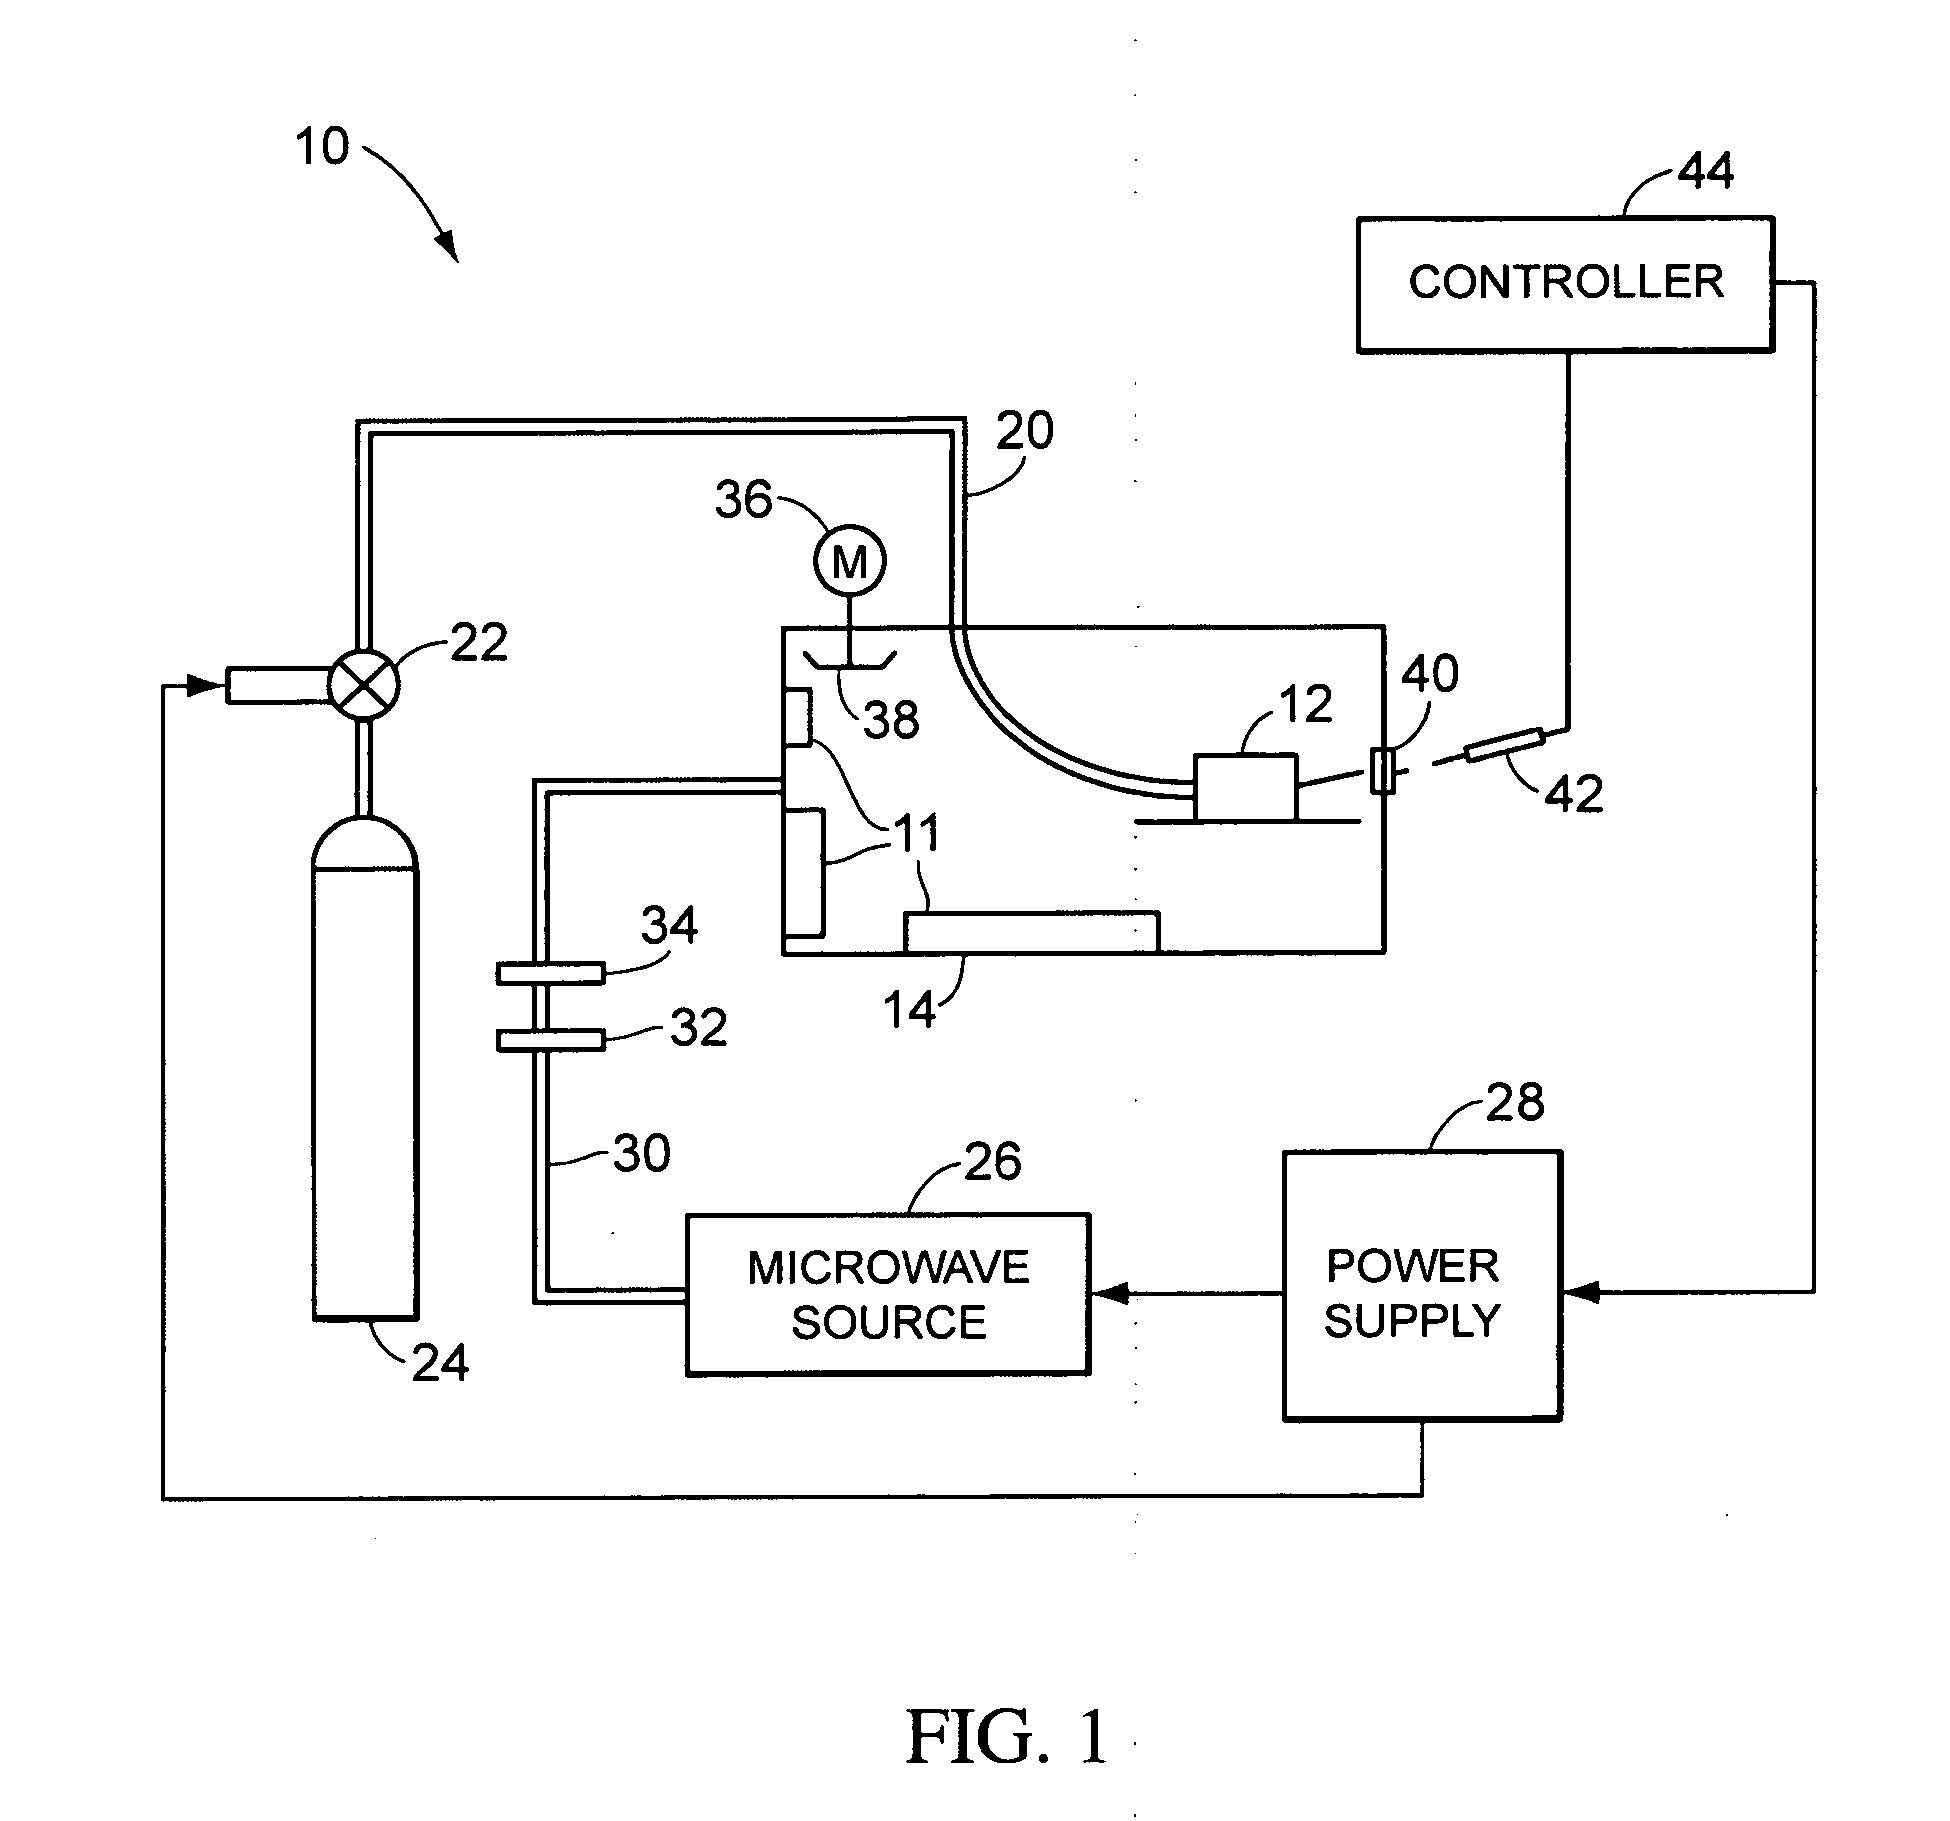 Plasma-assisted processing in a manufacturing line